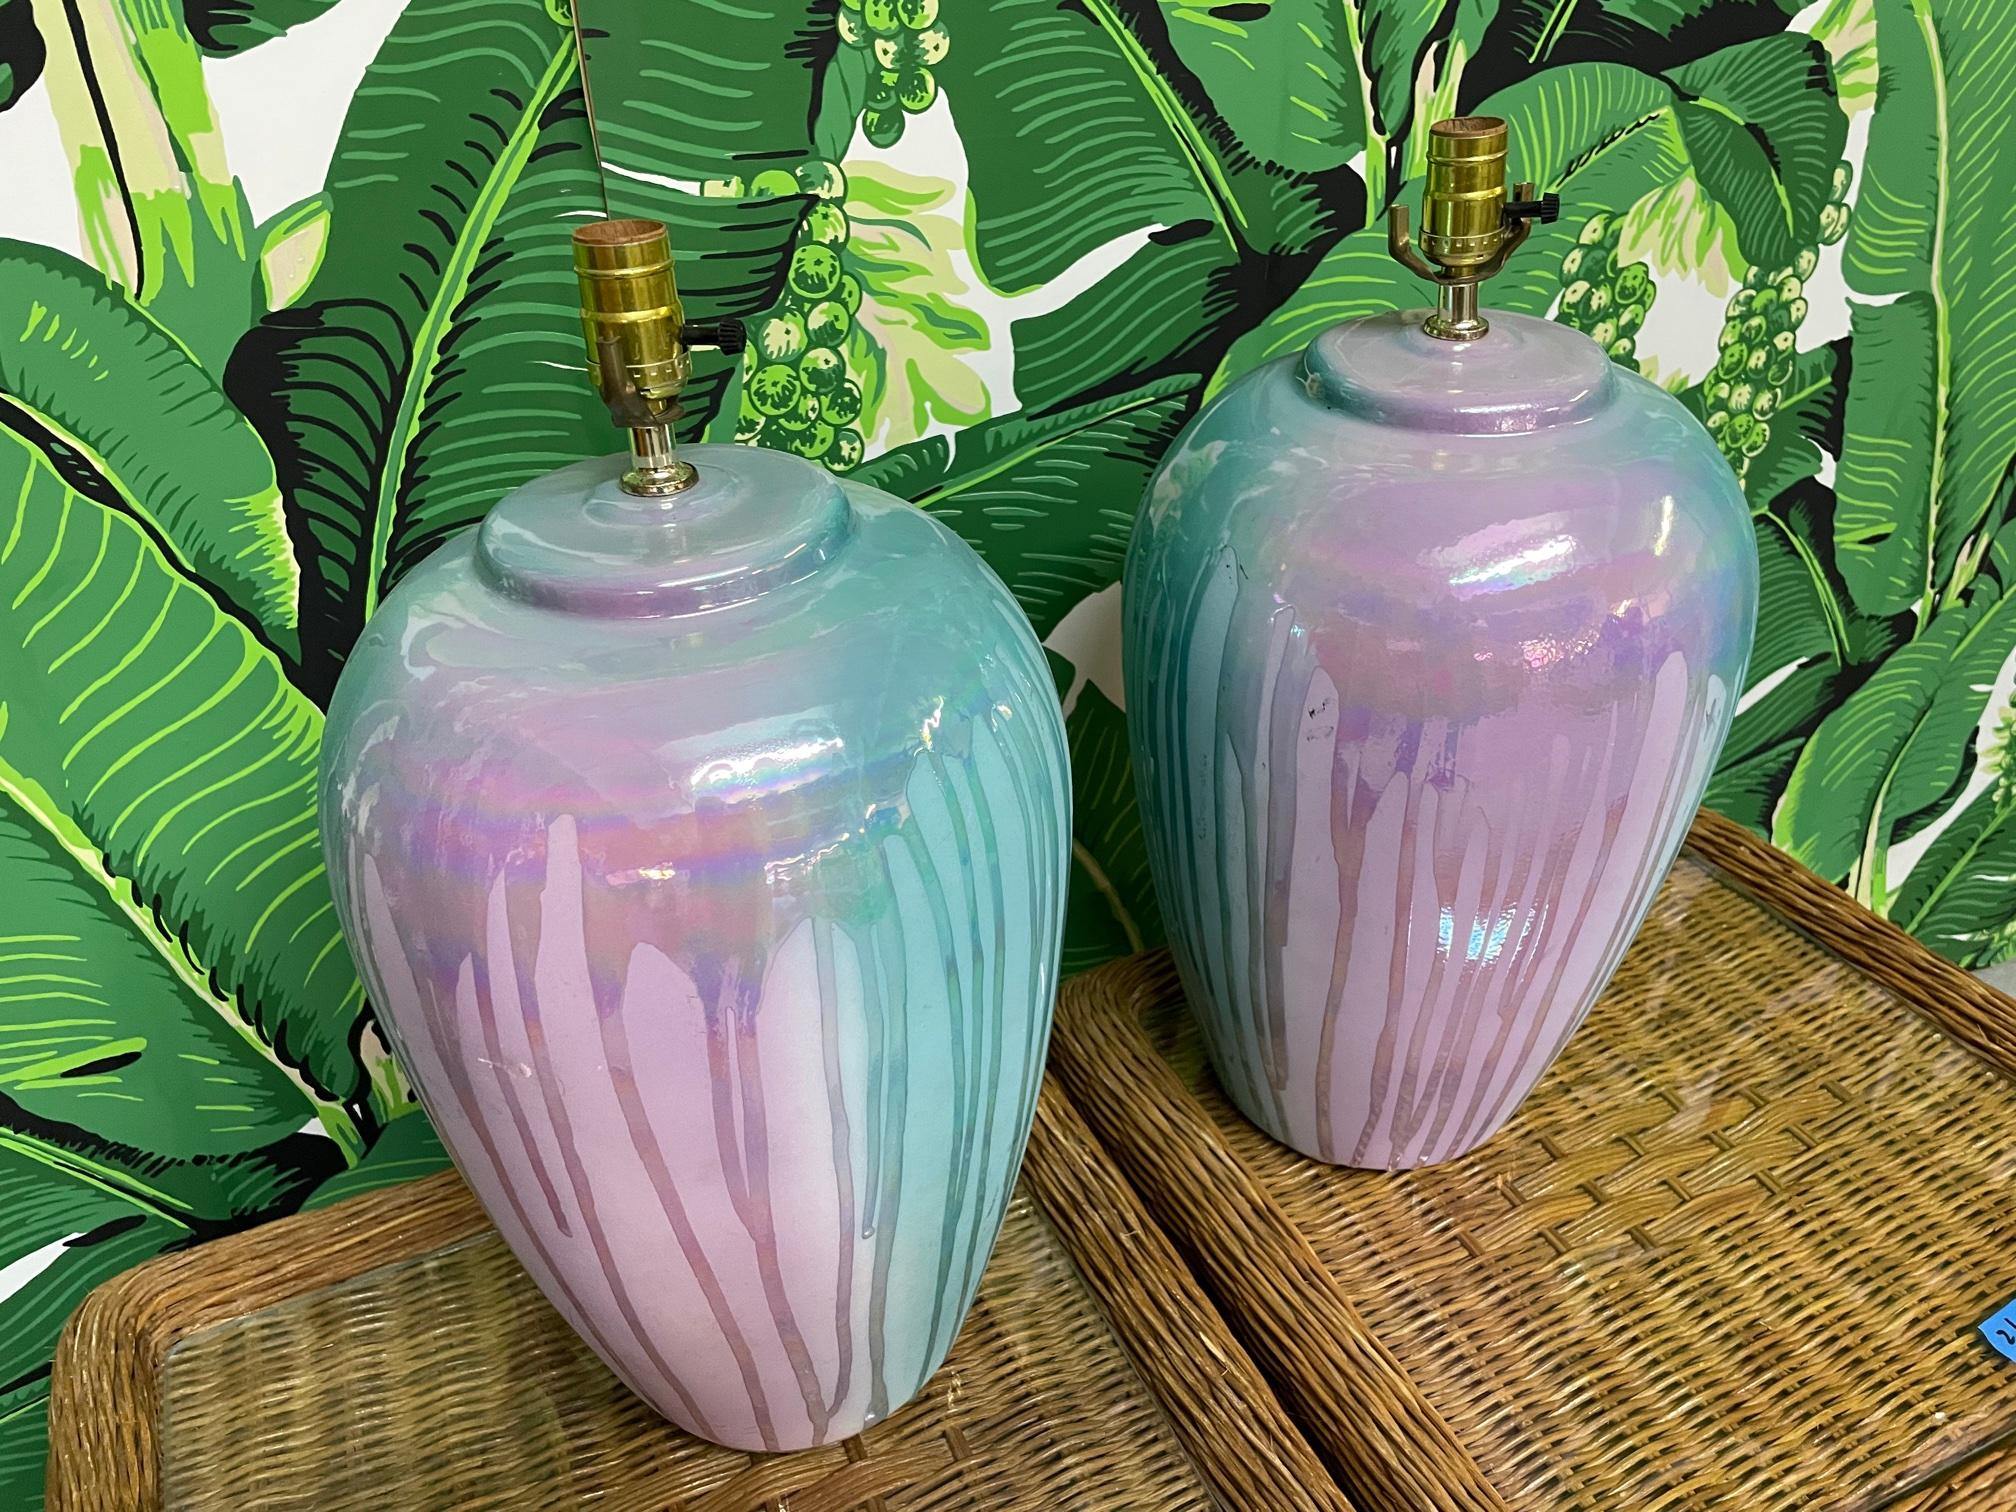 Pair of ceramic table lamps feature a drip glaze finish in teal and purple. Good condition with only very minor imperfections consistent with age.